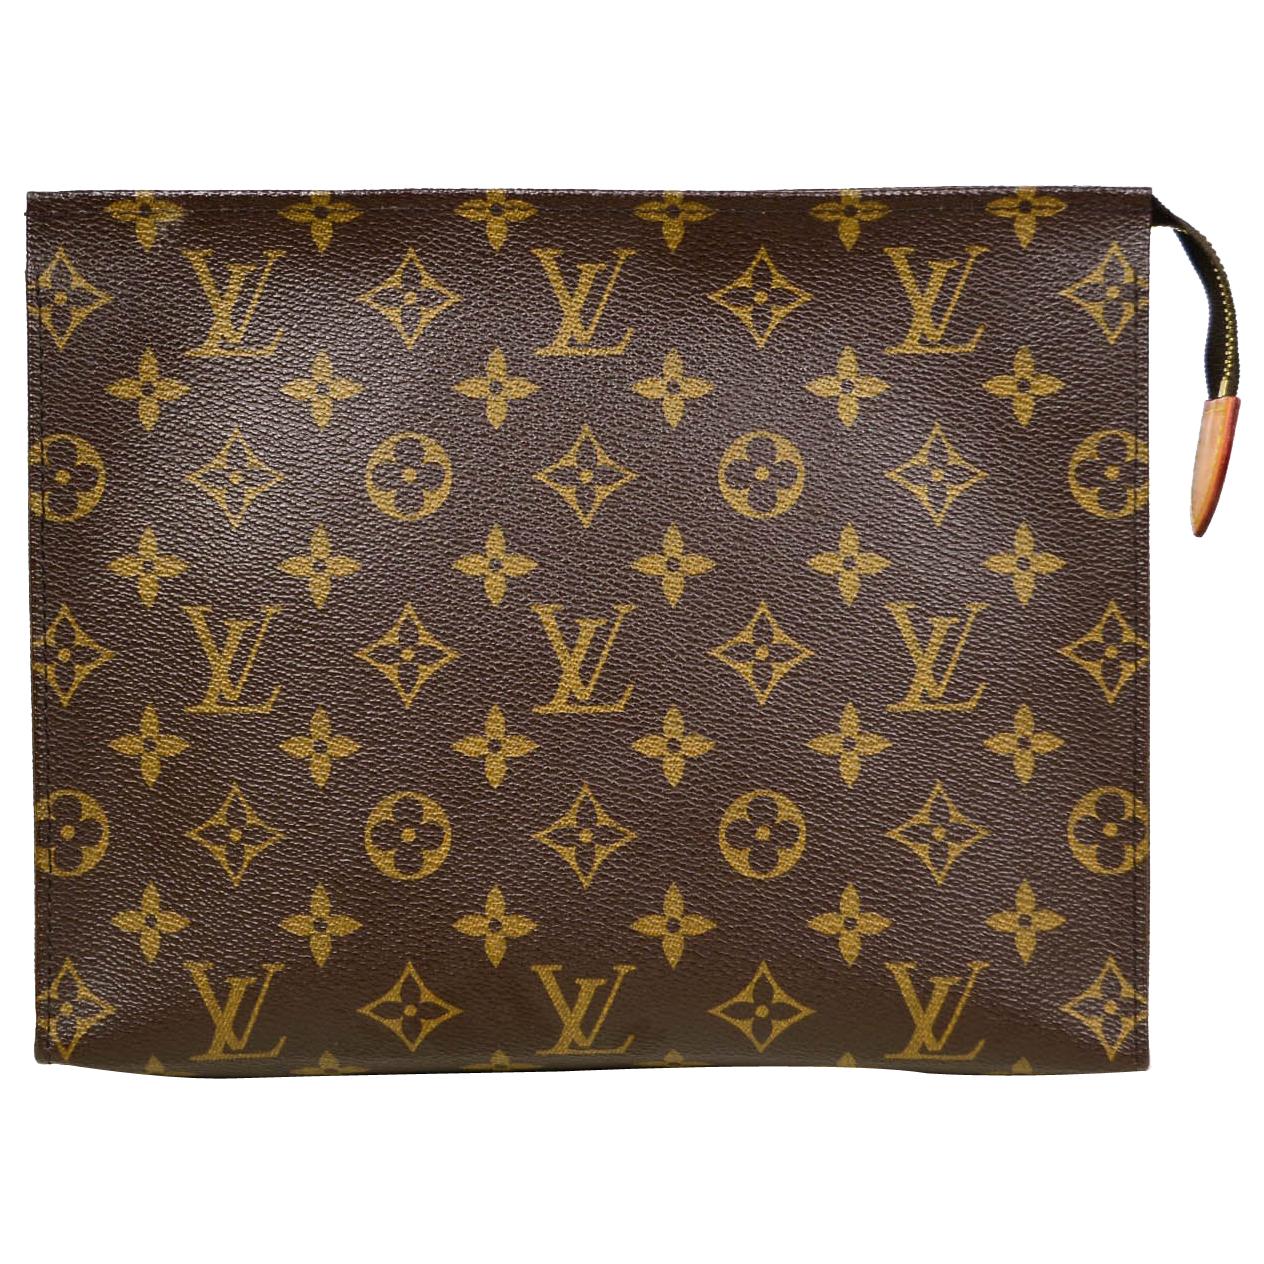 Louis Vuitton SOLD OUT Monogram Coated Canvas Toiletry 26 Pouch/Clutch Bag